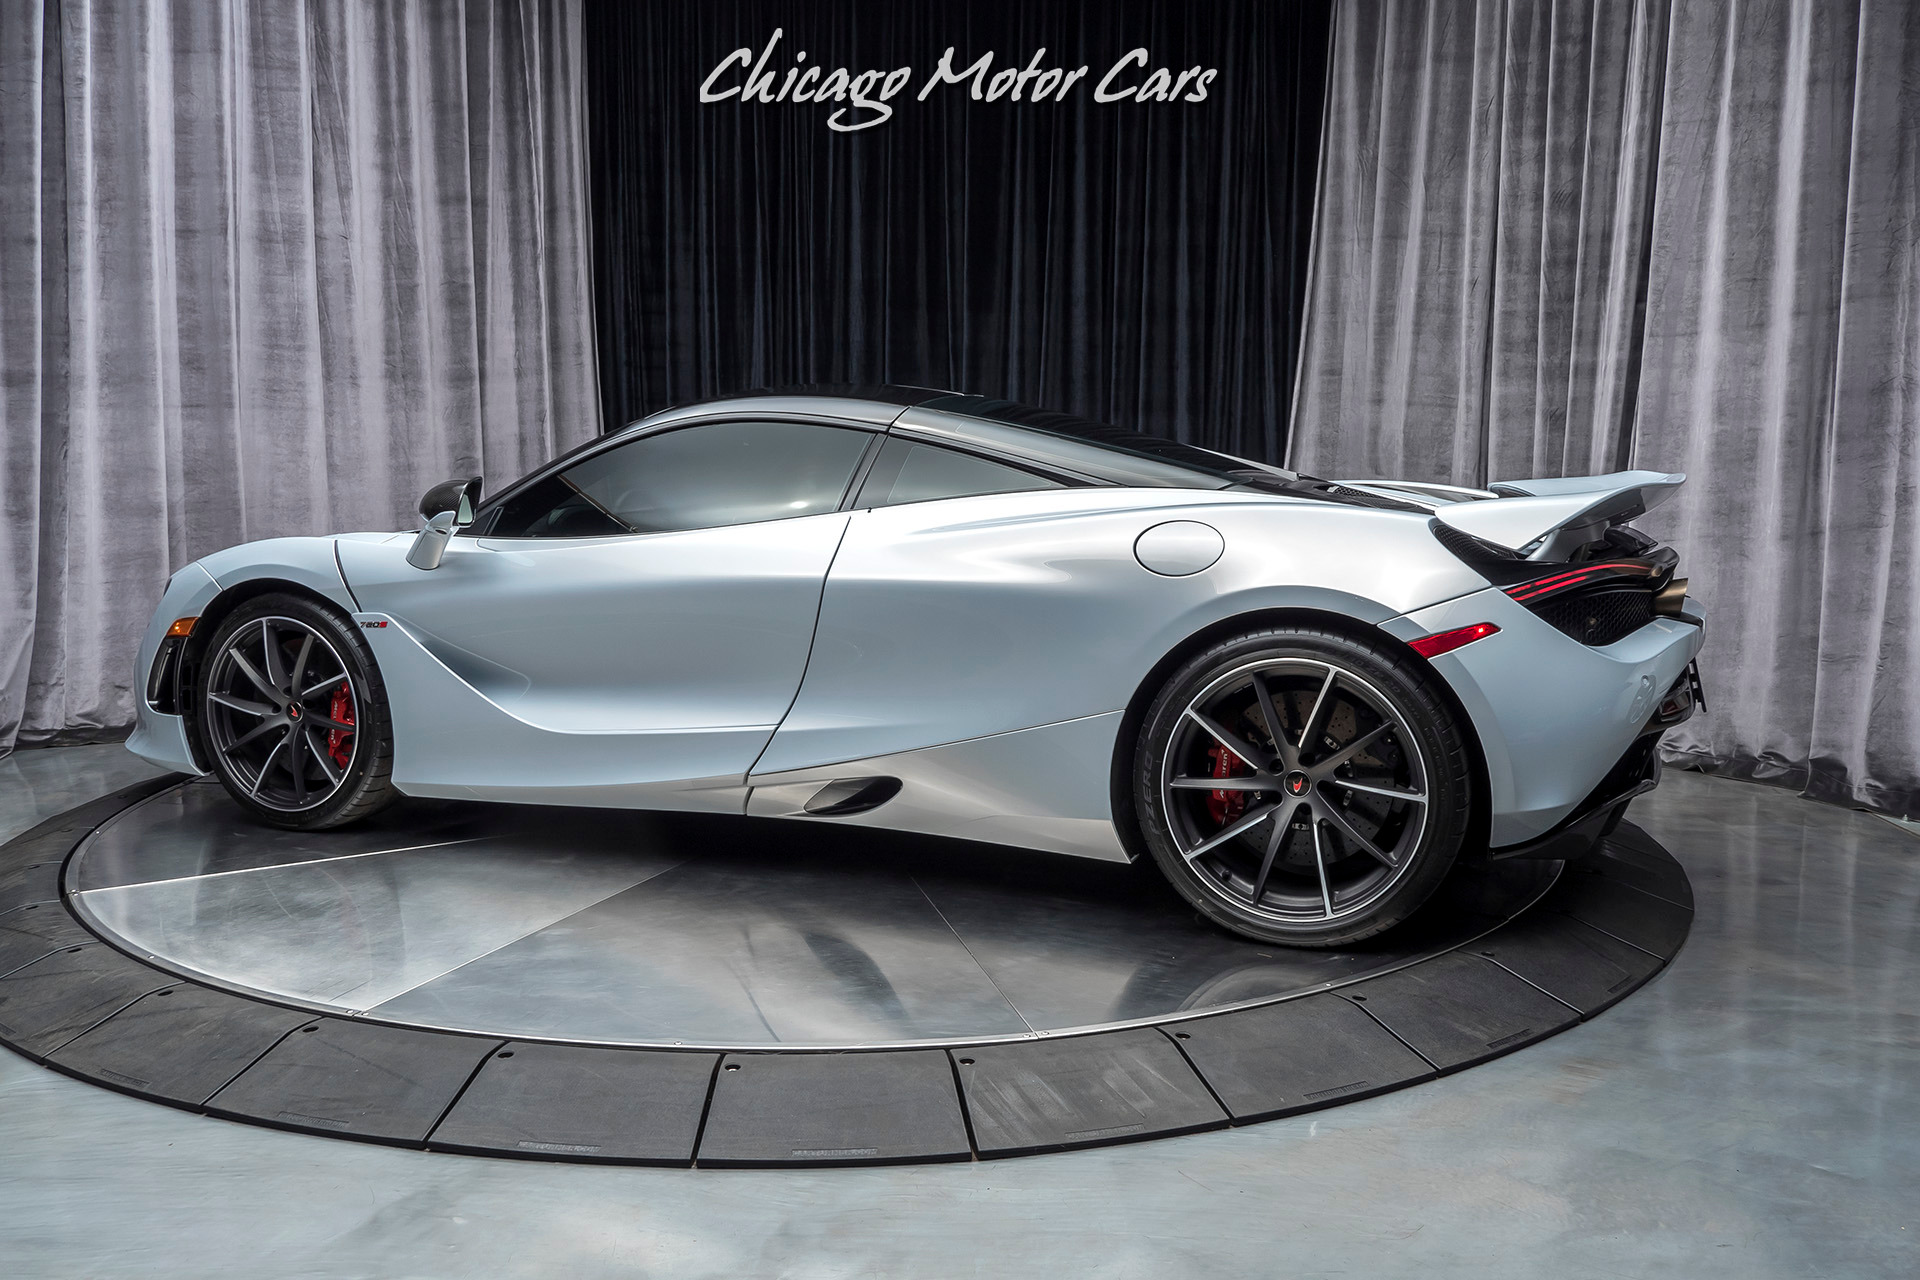 Used-2018-McLaren-720S-Performance-Coupe-MSRP-343k-FABSPEED-EXHAUST-SYSTEM-ONLY-750-MILES